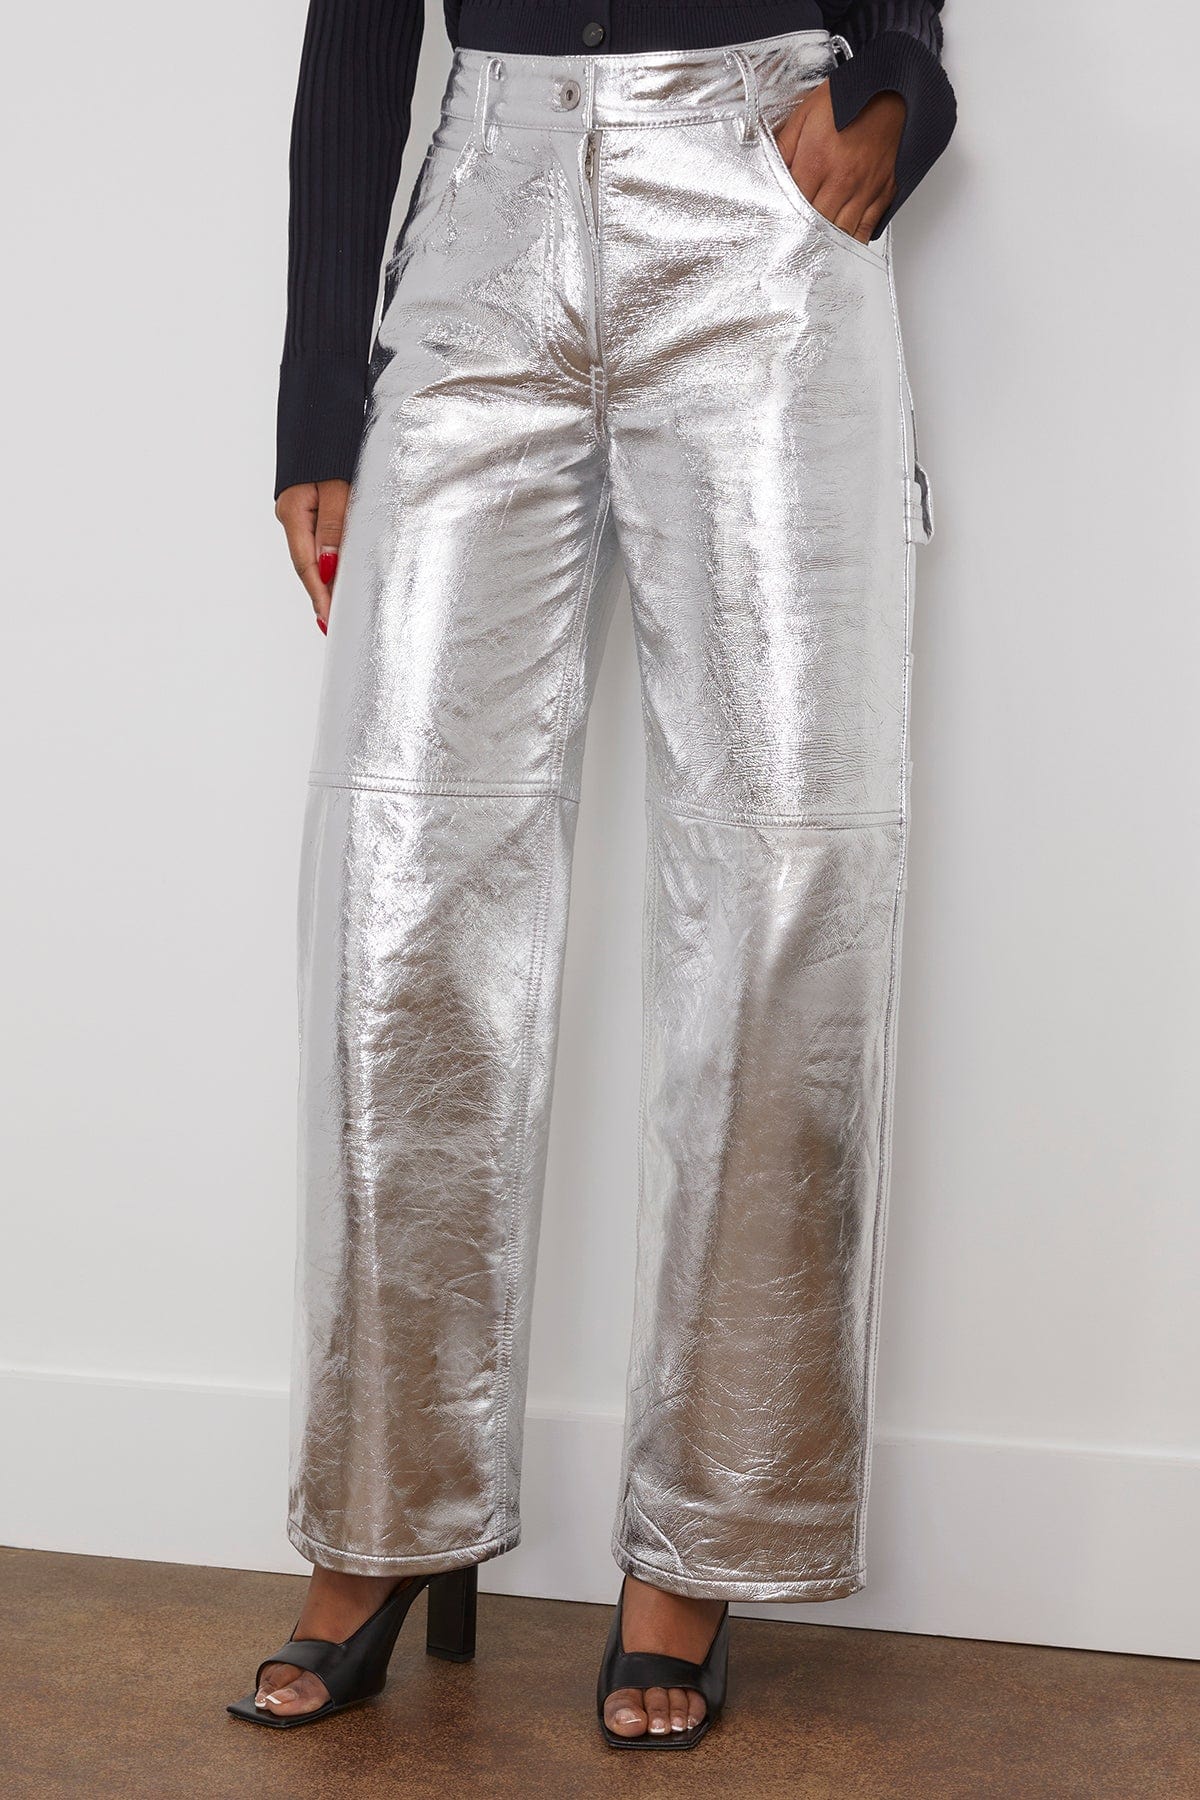 Interior Pants The Sterling Pant in Aluminum Interior The Sterling Pant in Aluminum